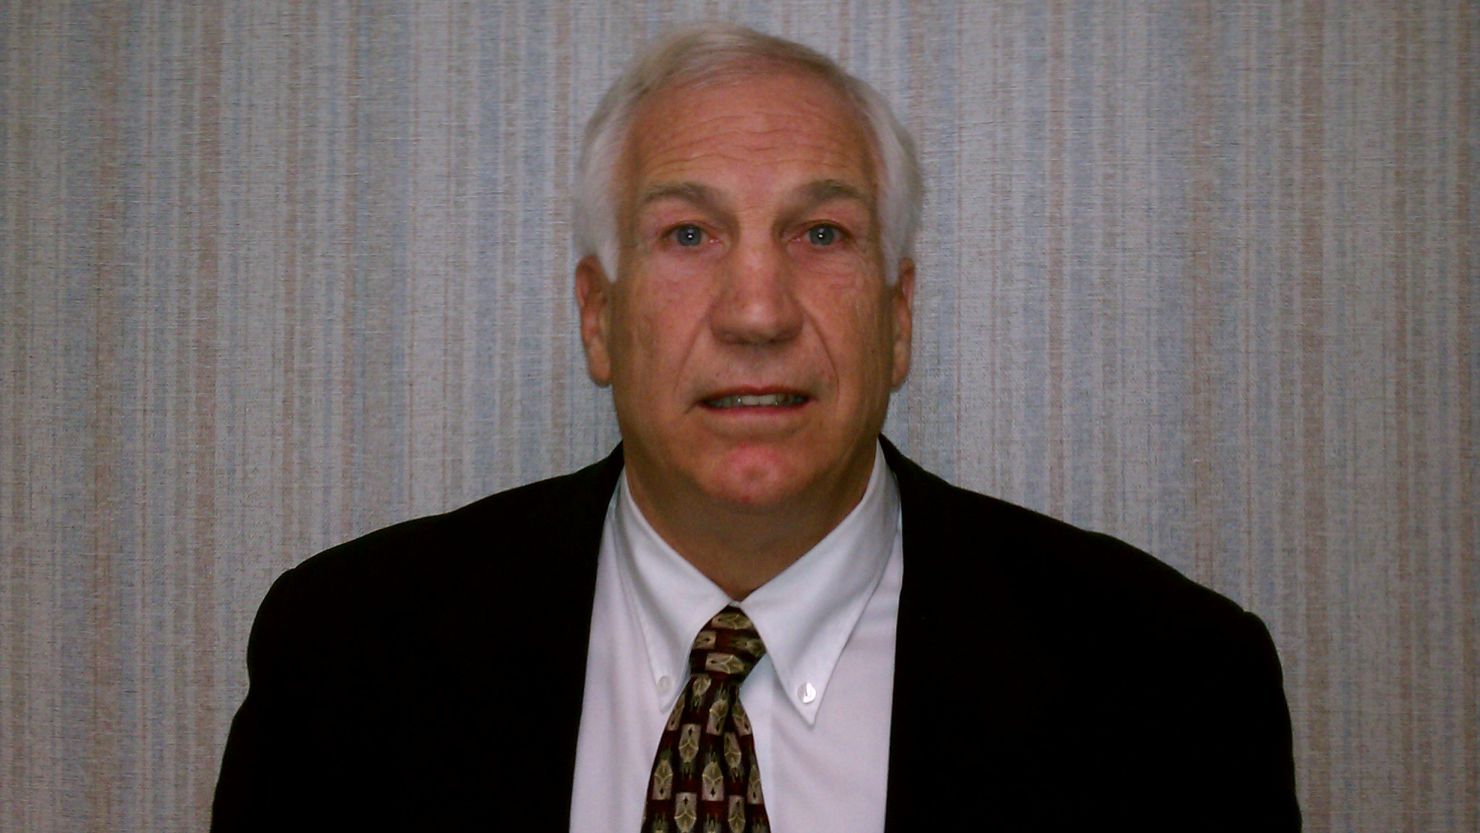 Retired Penn State assistant coach Jerry Sandusky was arrested Saturday and faces sexual child abuse charges.